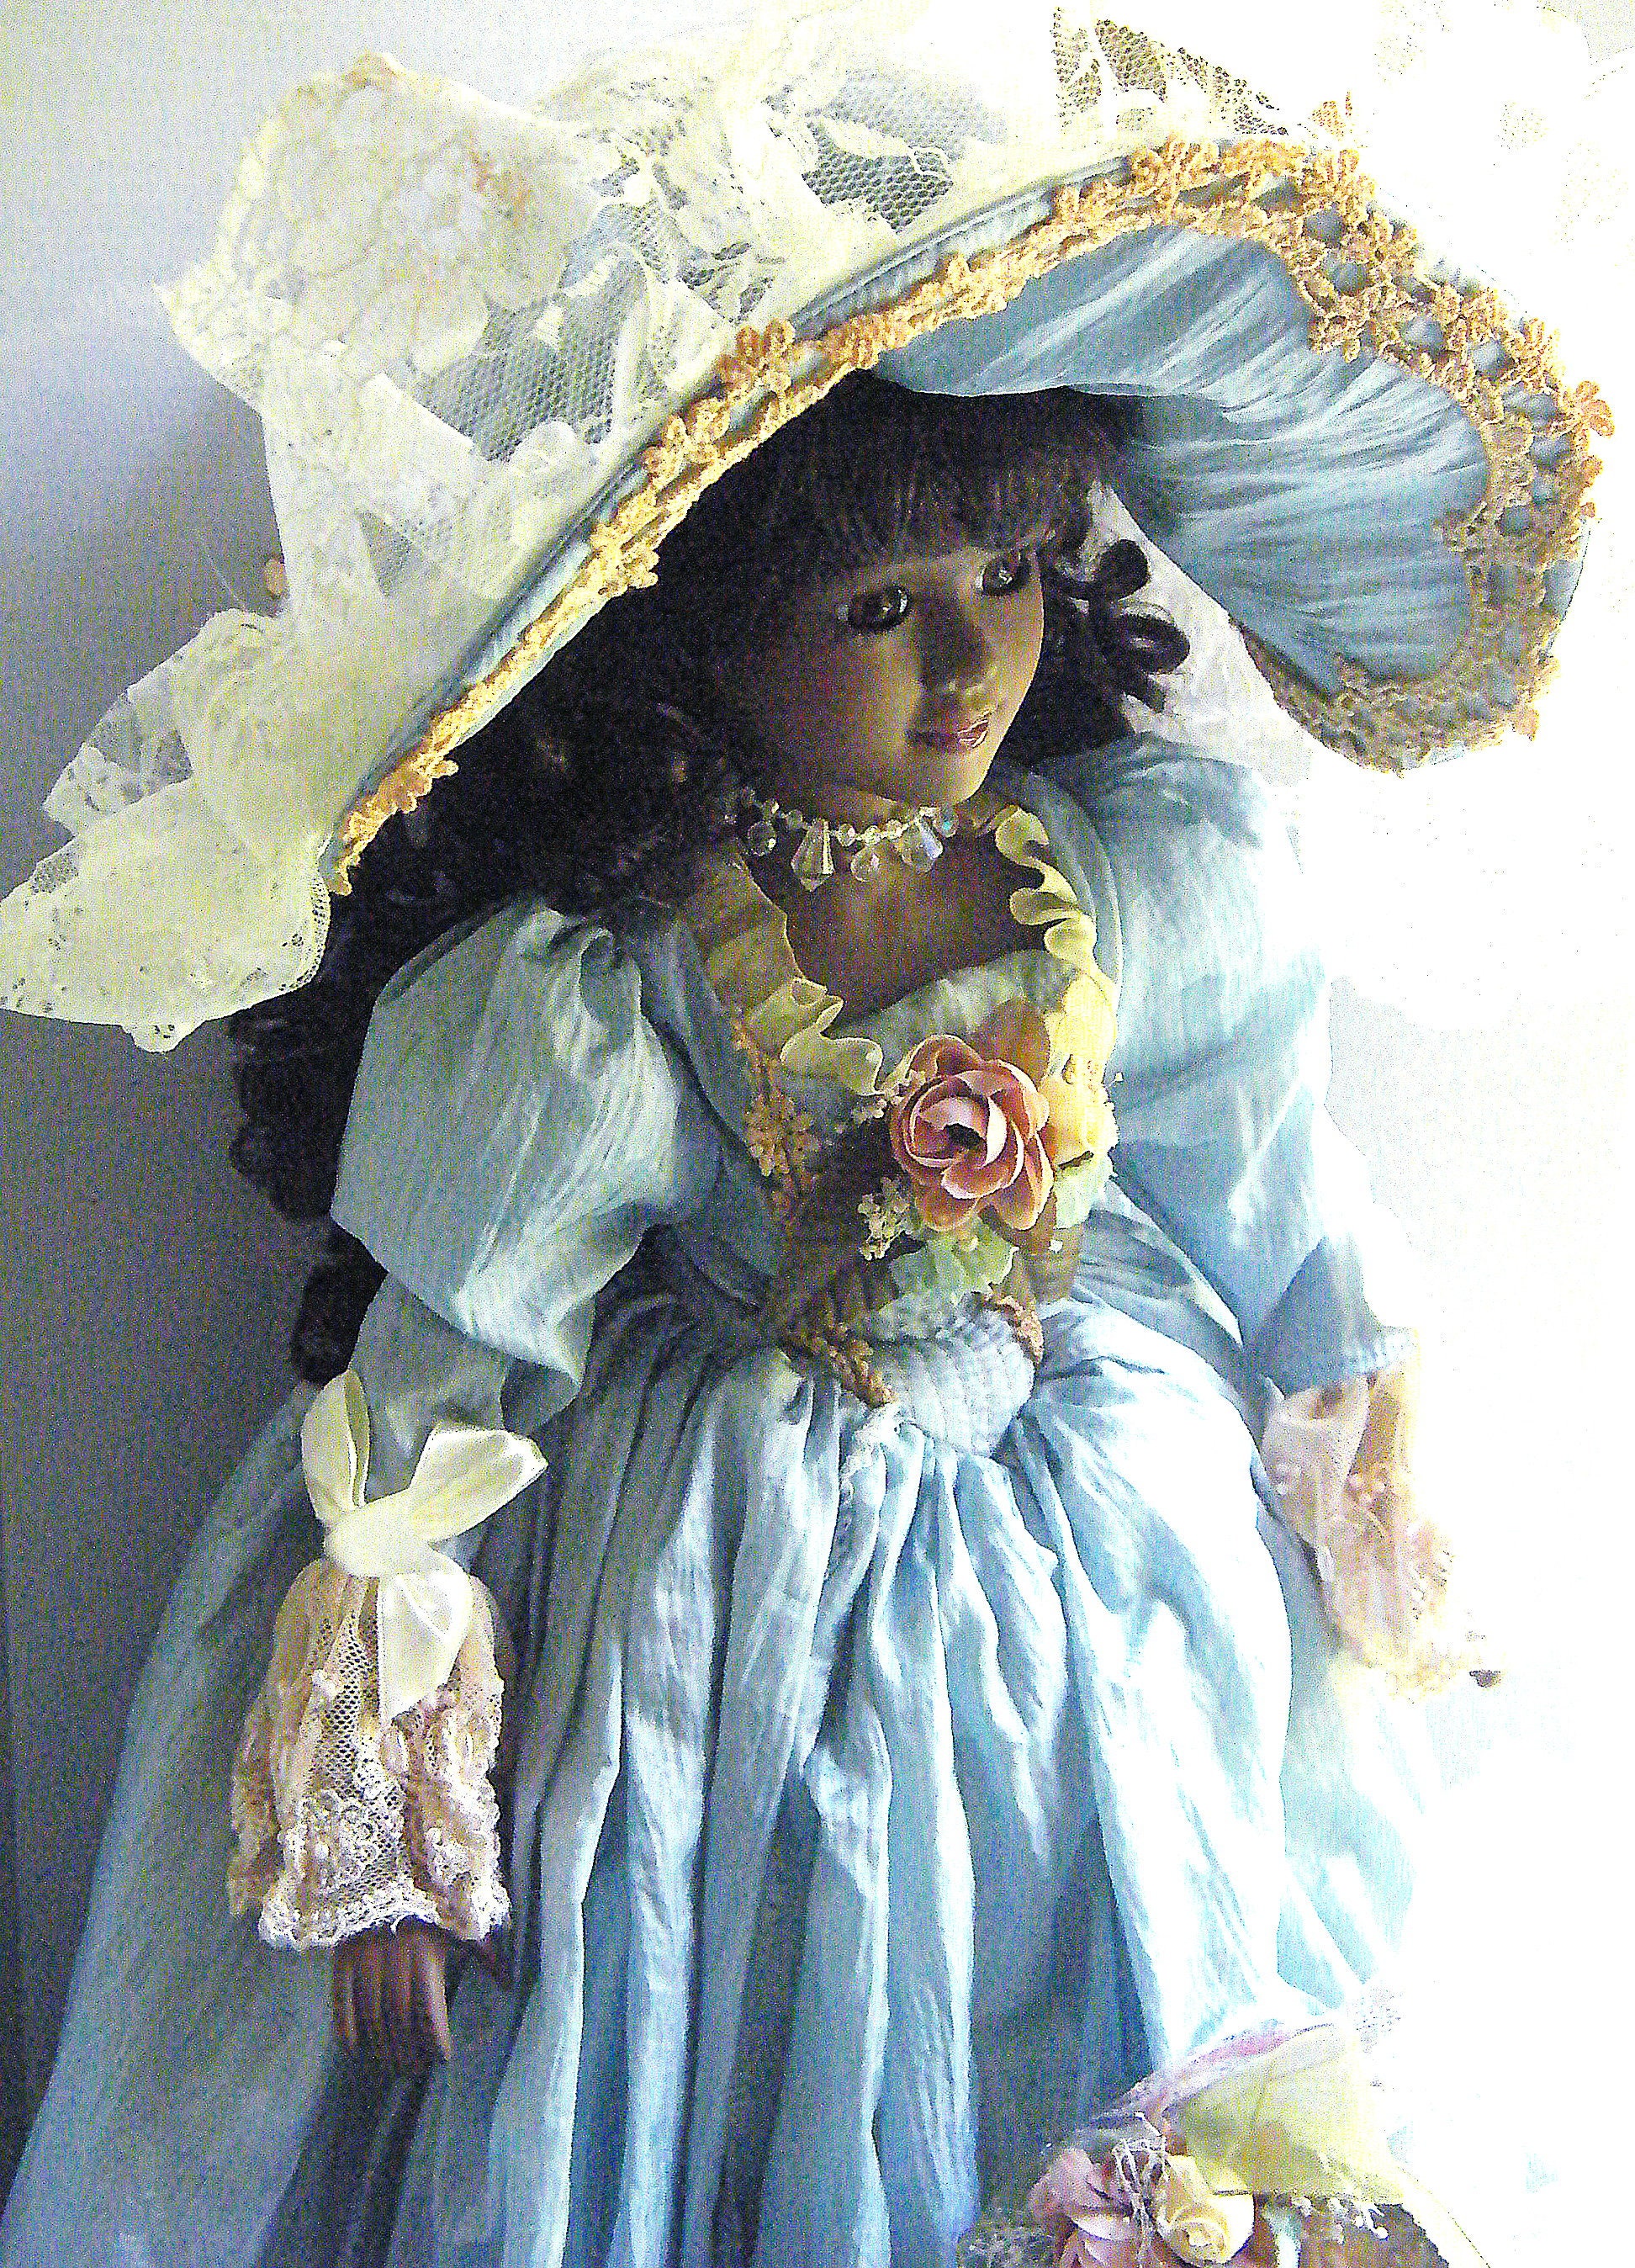 Buy Soft Expressions Porcelain Bisque Doll Country Girl Blue Dress Online  in India 